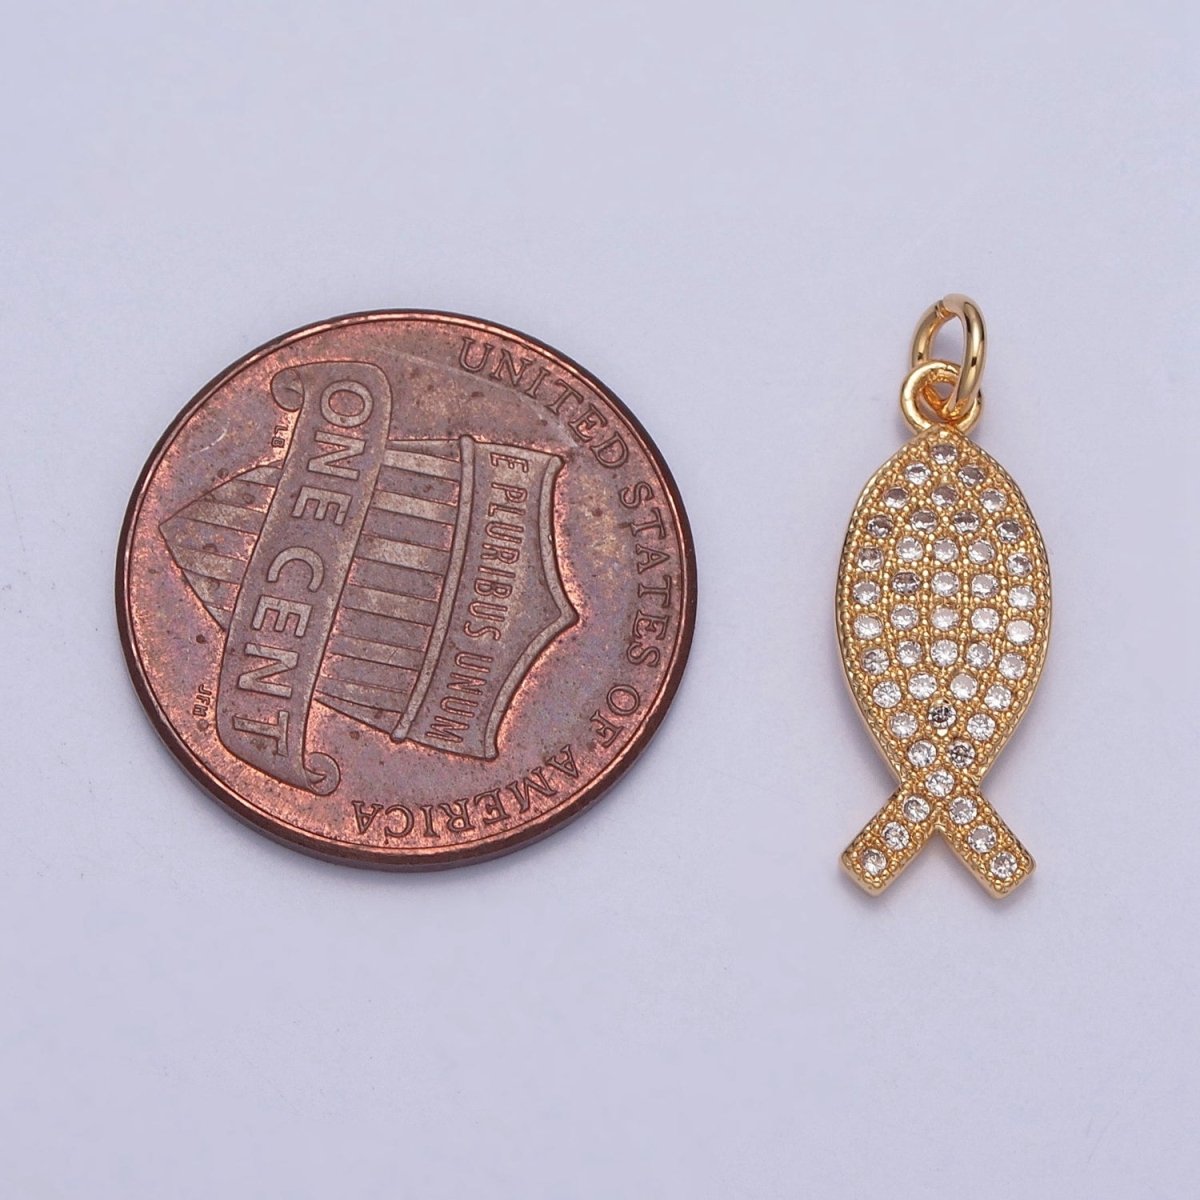 Micro Paved CZ Fish Outline Gold Charm For Ocean Lake Jewelry Making | X-239 - DLUXCA